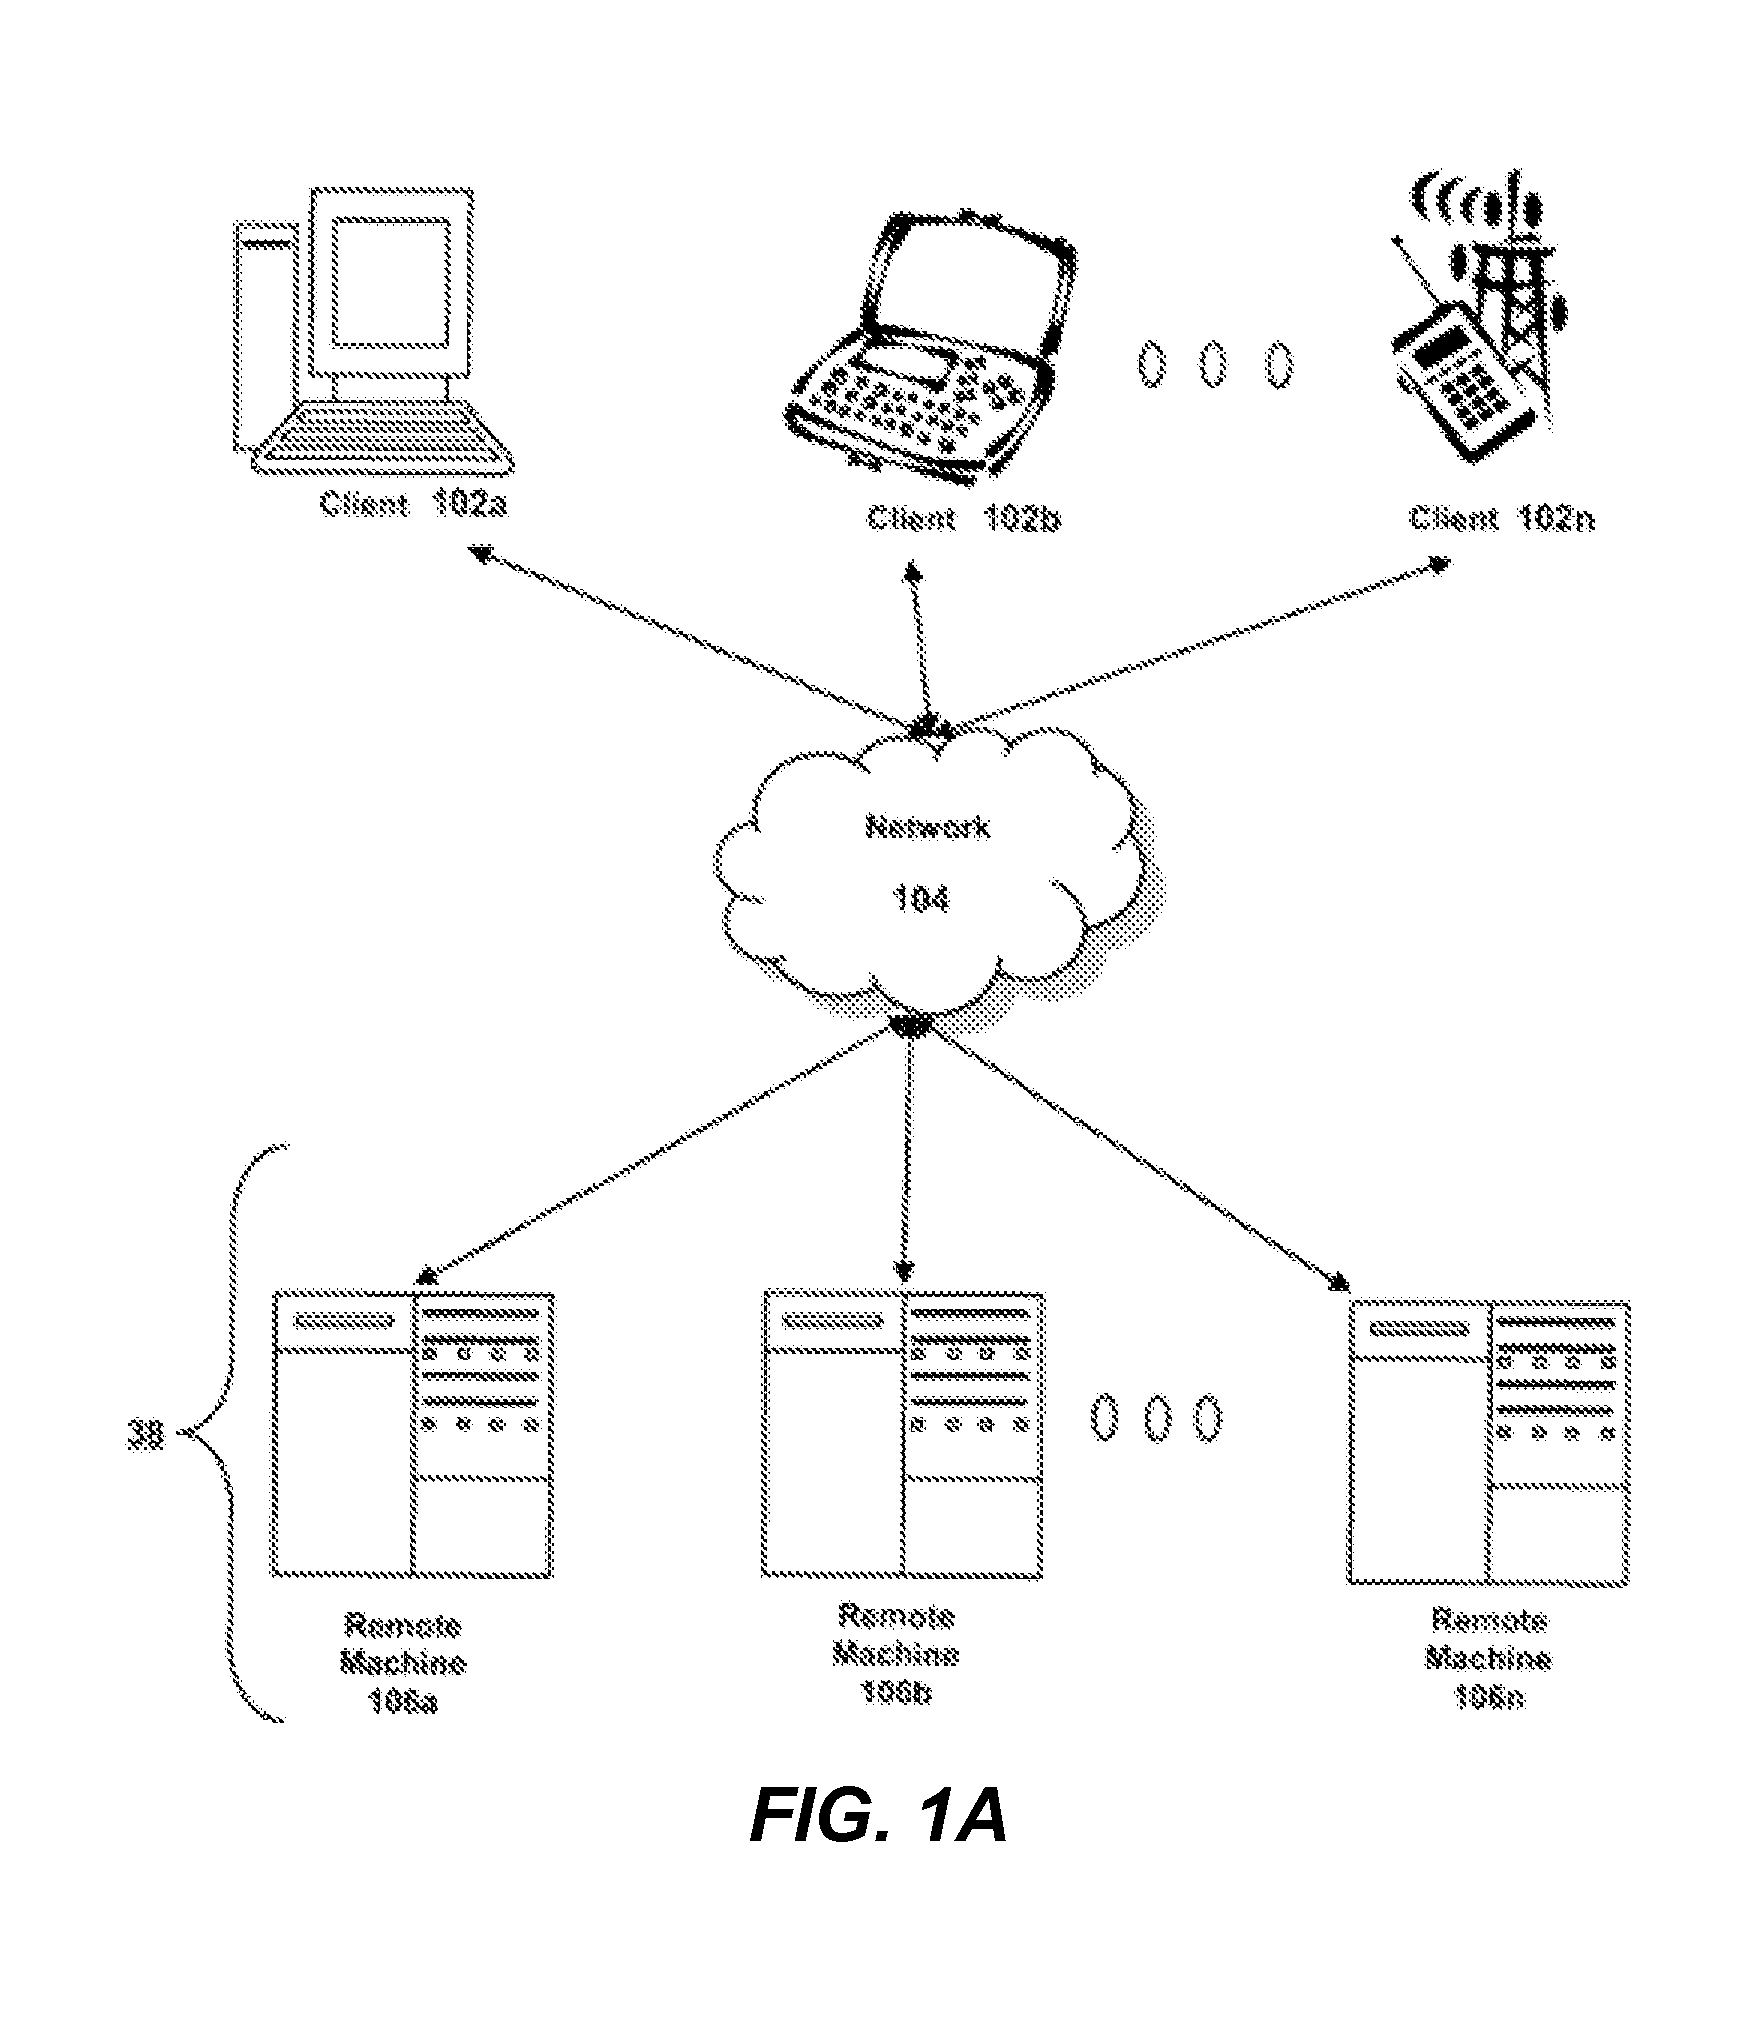 Transparent user interface integration between local and remote computing environments